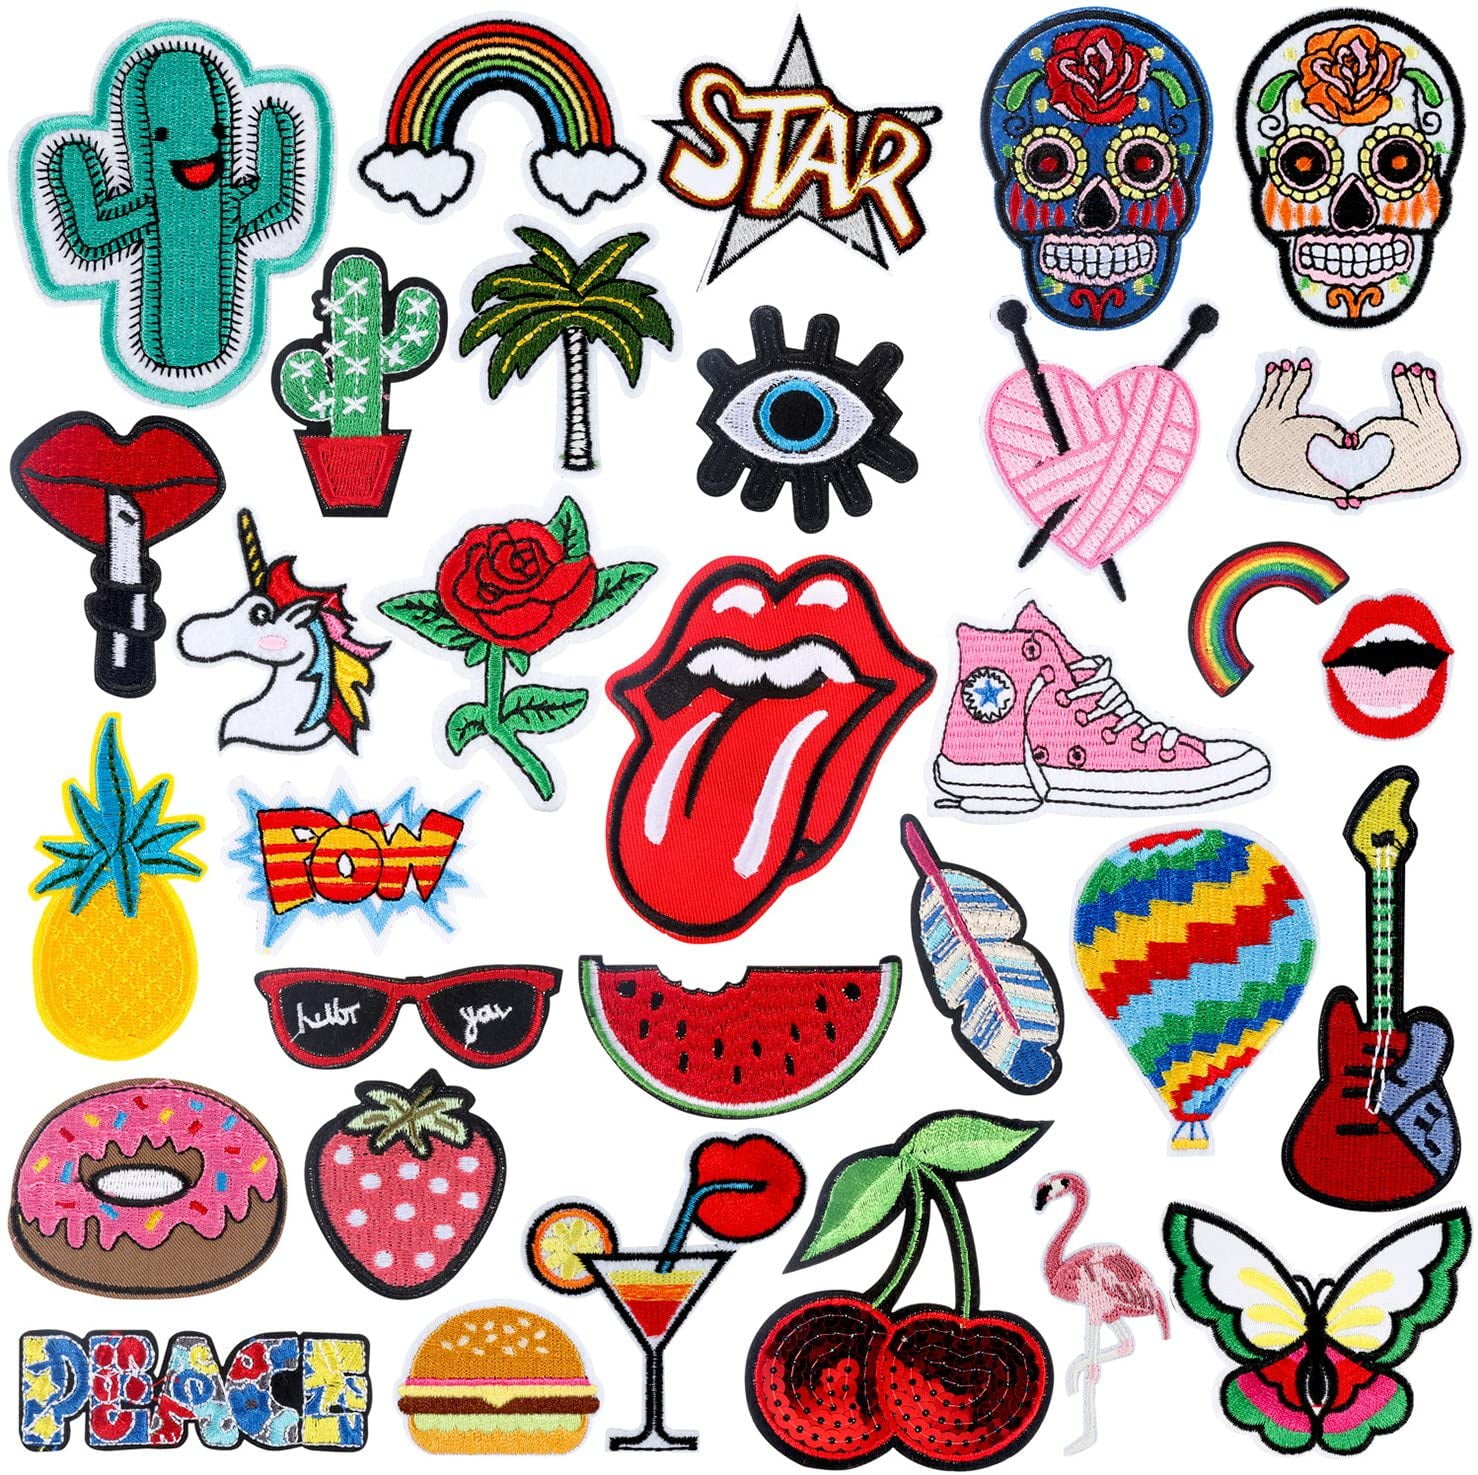 U-Sky 32pcs Assorted Iron on Patches for Kids Clothing Sew on Appliques for Jeans Jackets Backpacks Vest Dress Holes Logo